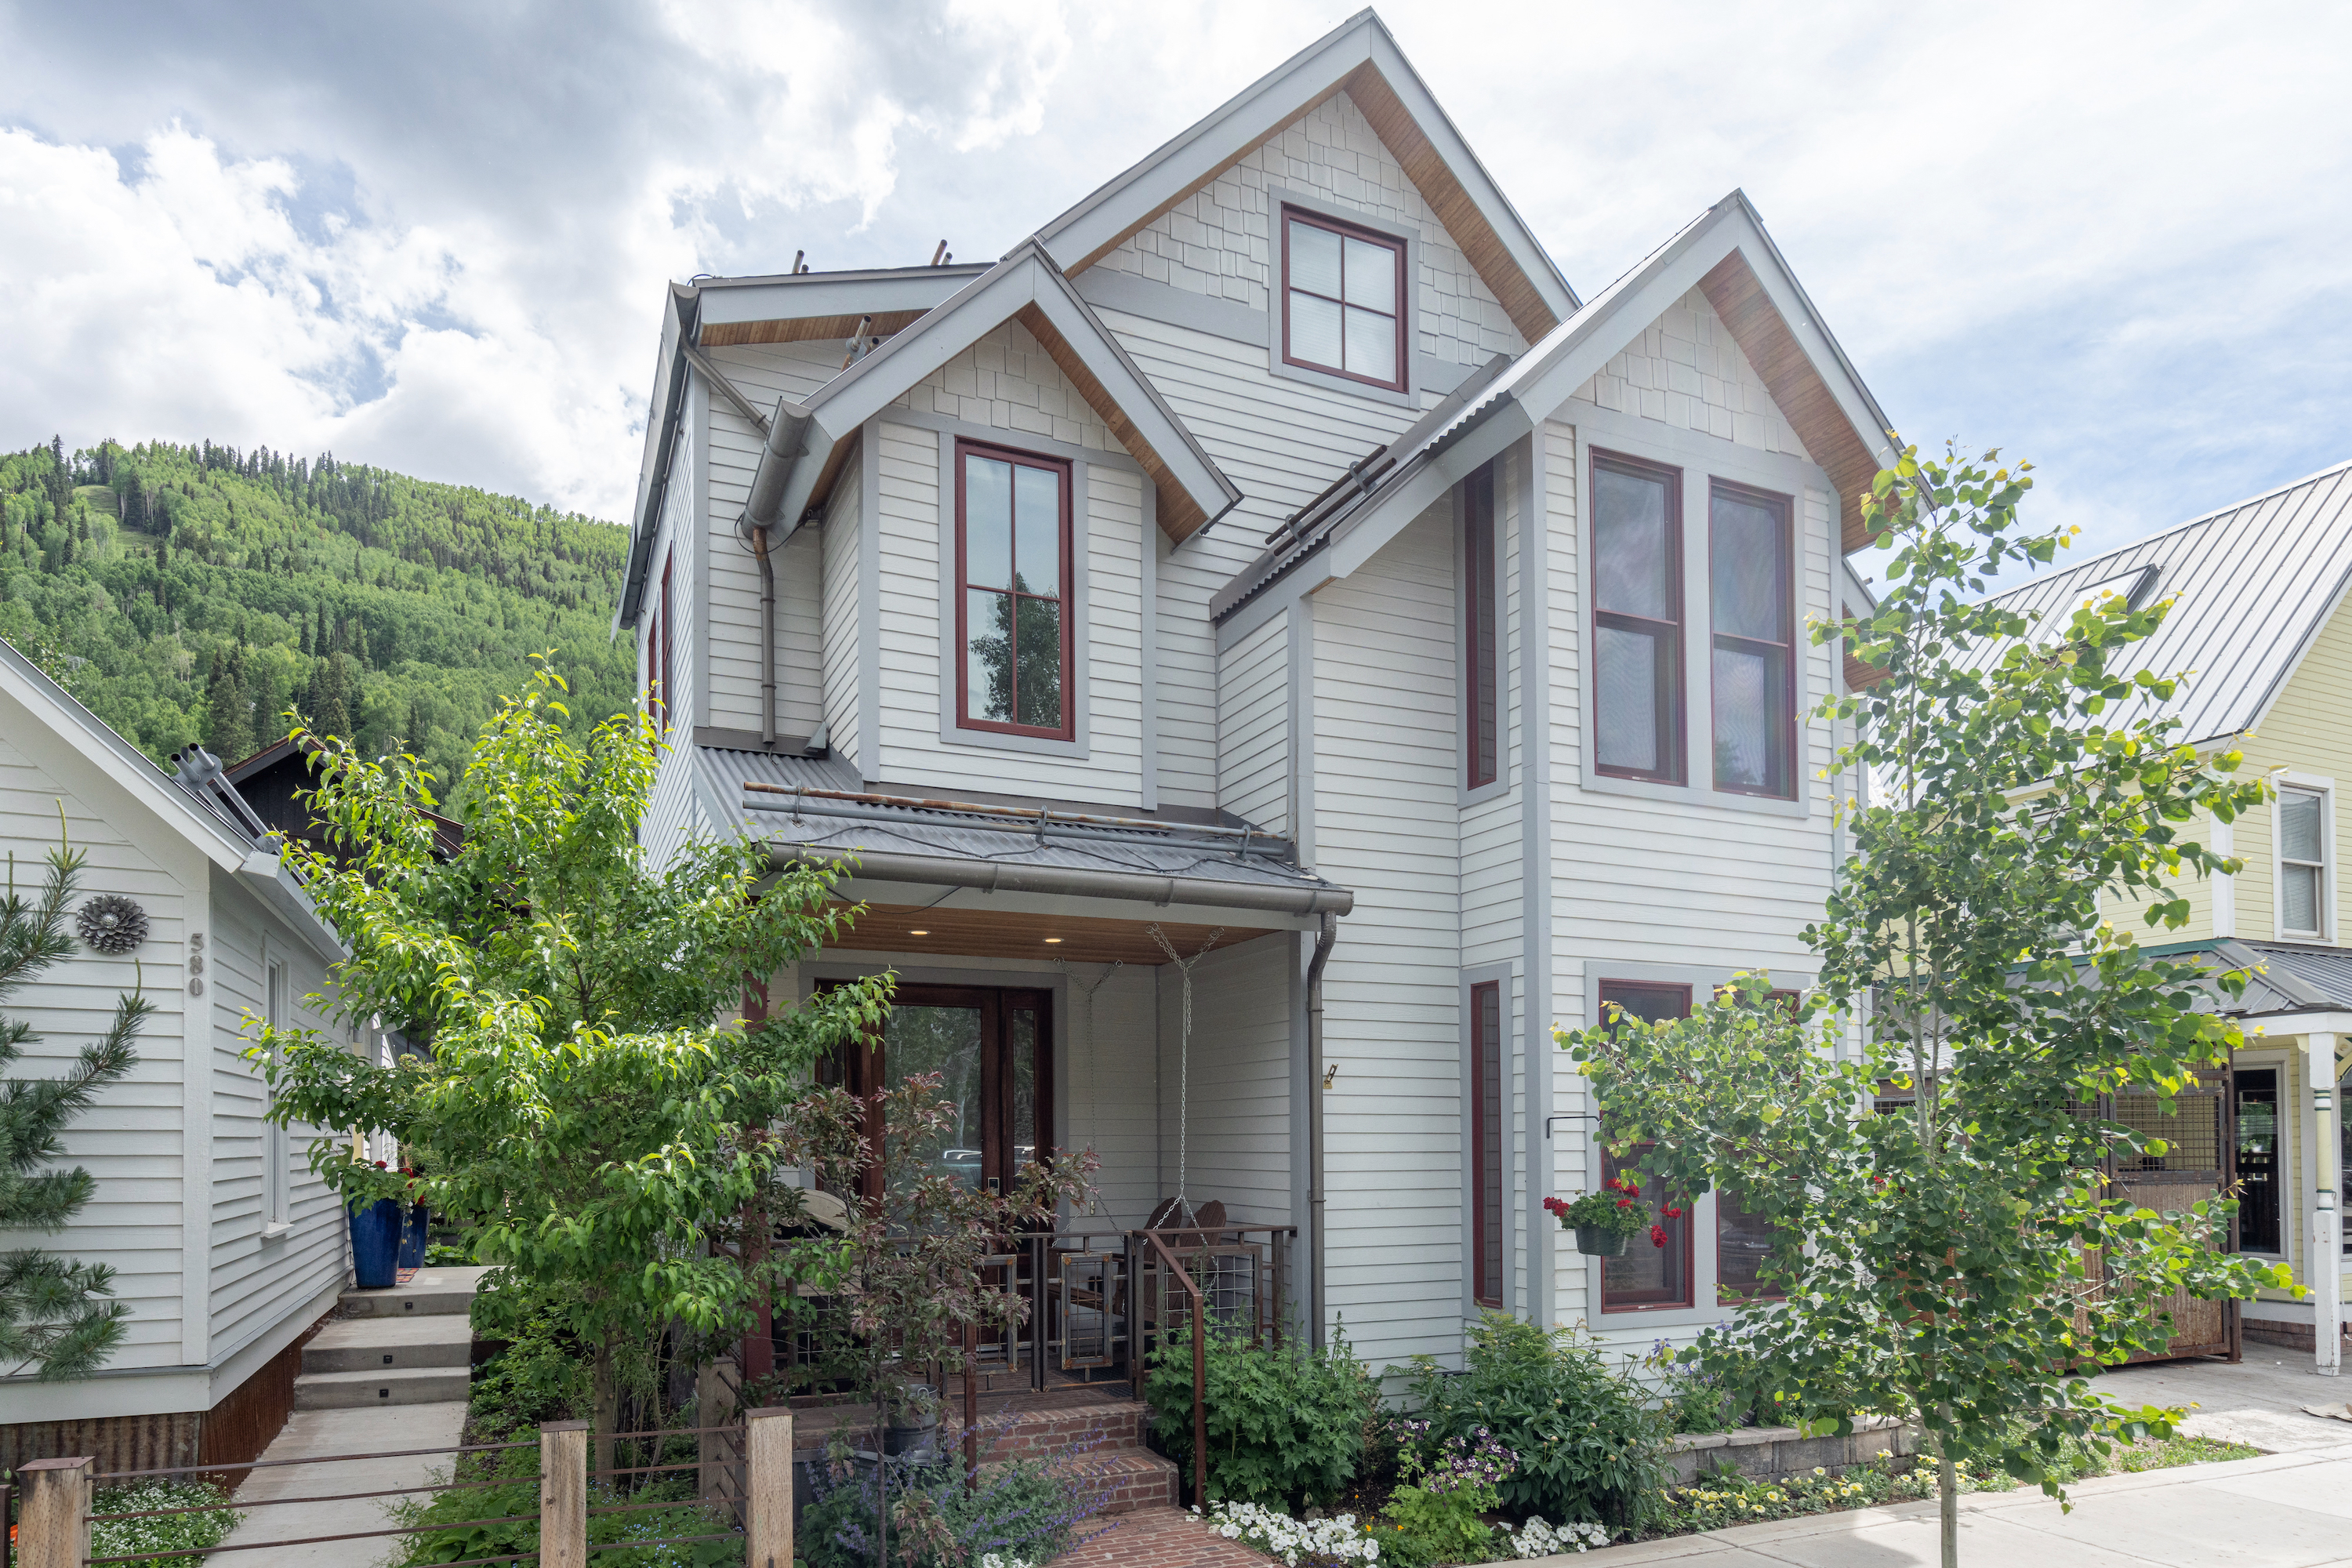 1.0_Local_Luxury_Telluride_Vacation_Rental_Exterior_Front3